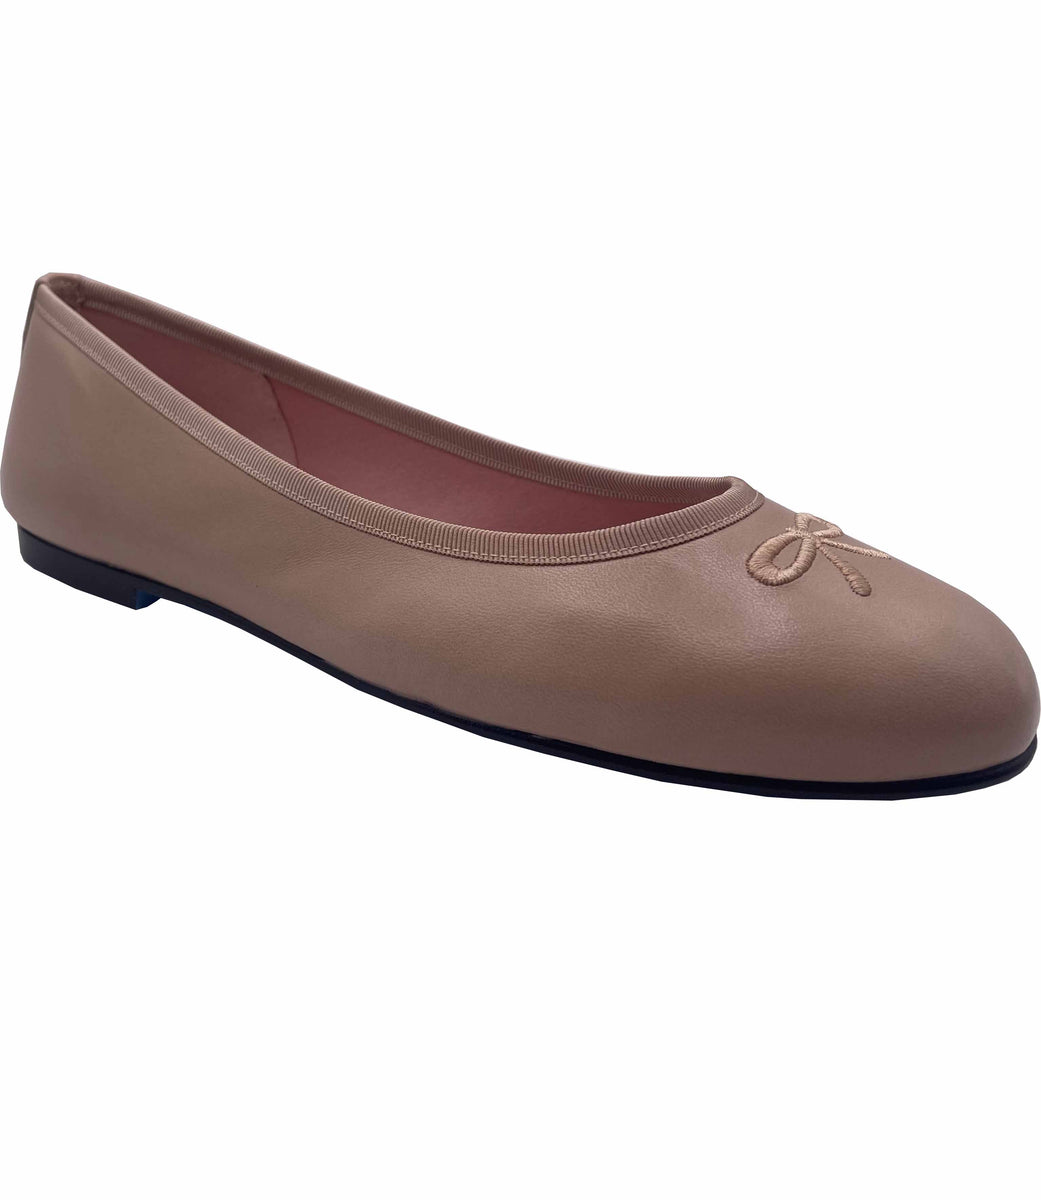 Kathy - Beige Leather – French Sole